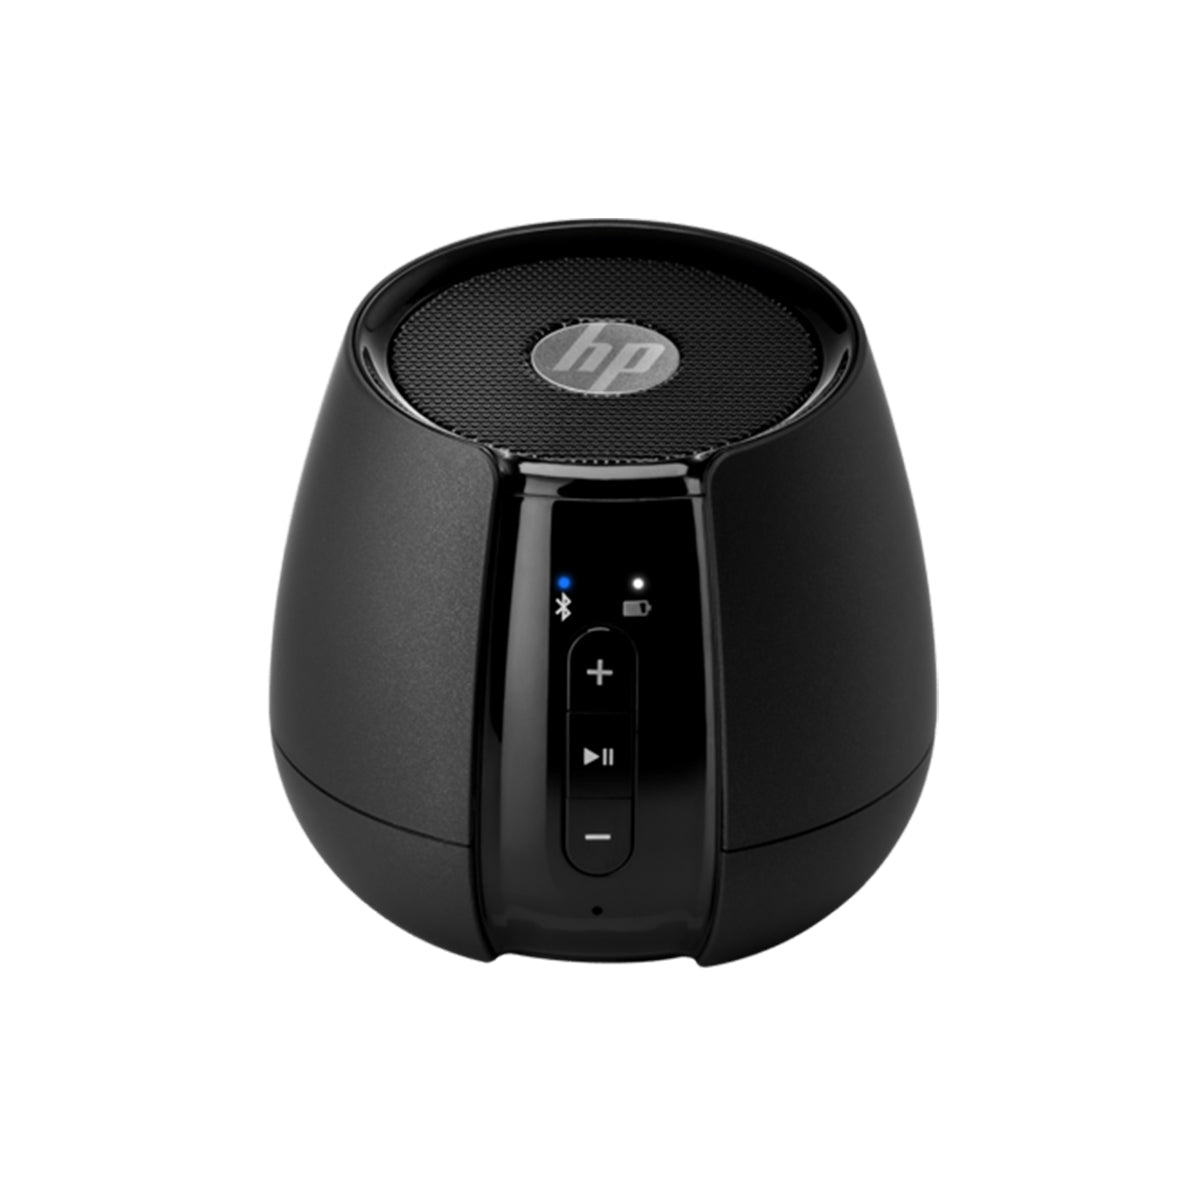 HP S6500 Wireless Mini Speakers Black with upto 10 Hours Battery Life